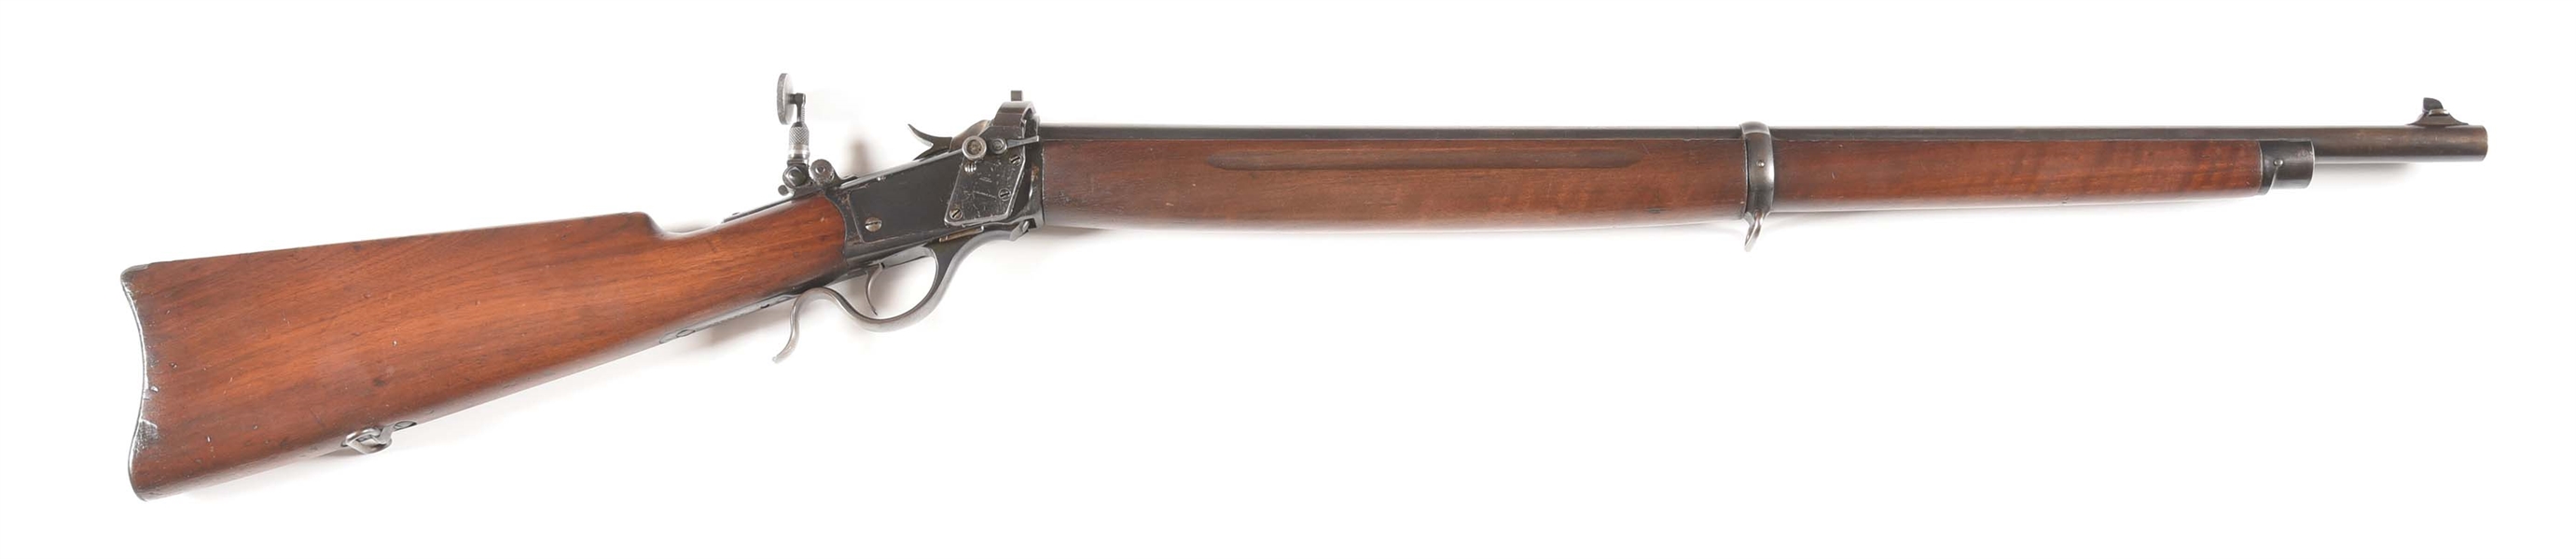 (C) WINCHESTER WINDER MUSKET SINGLE SHOT RIFLE IN .22 SHORT.